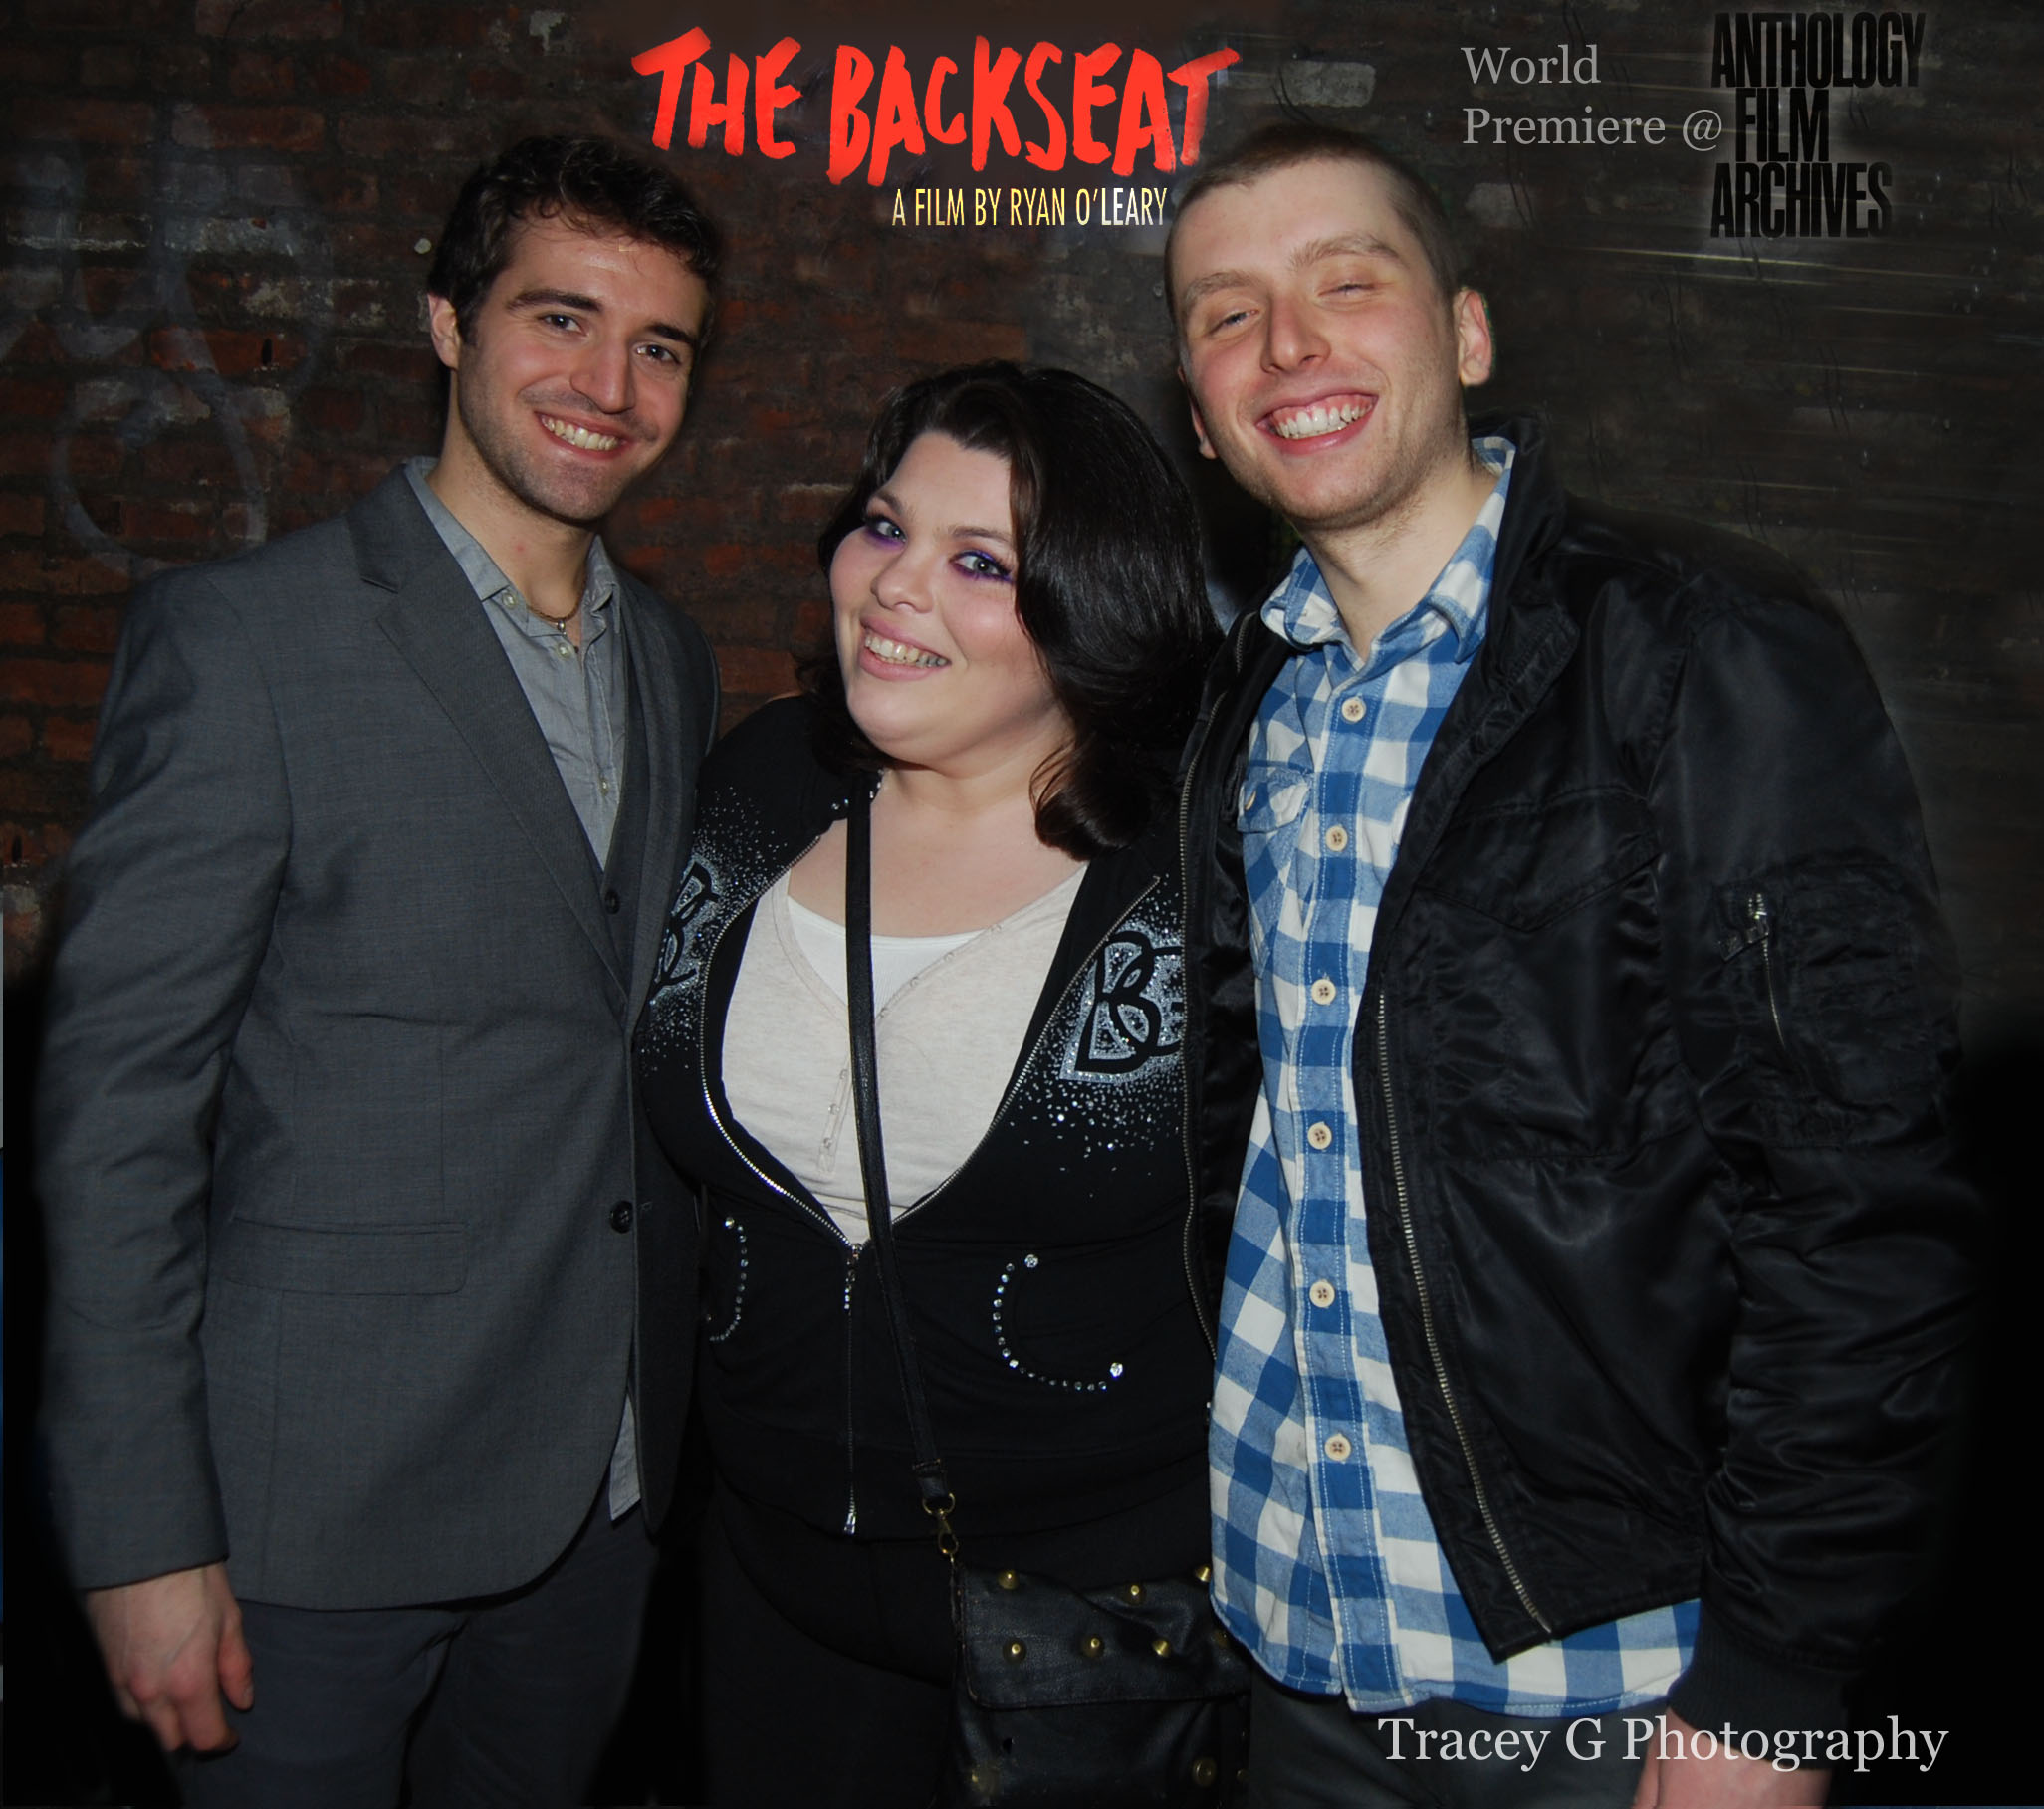 The Backseat world premier (From Left to Right: Costa Nicholas, Diana Costello, Chris Bellant)